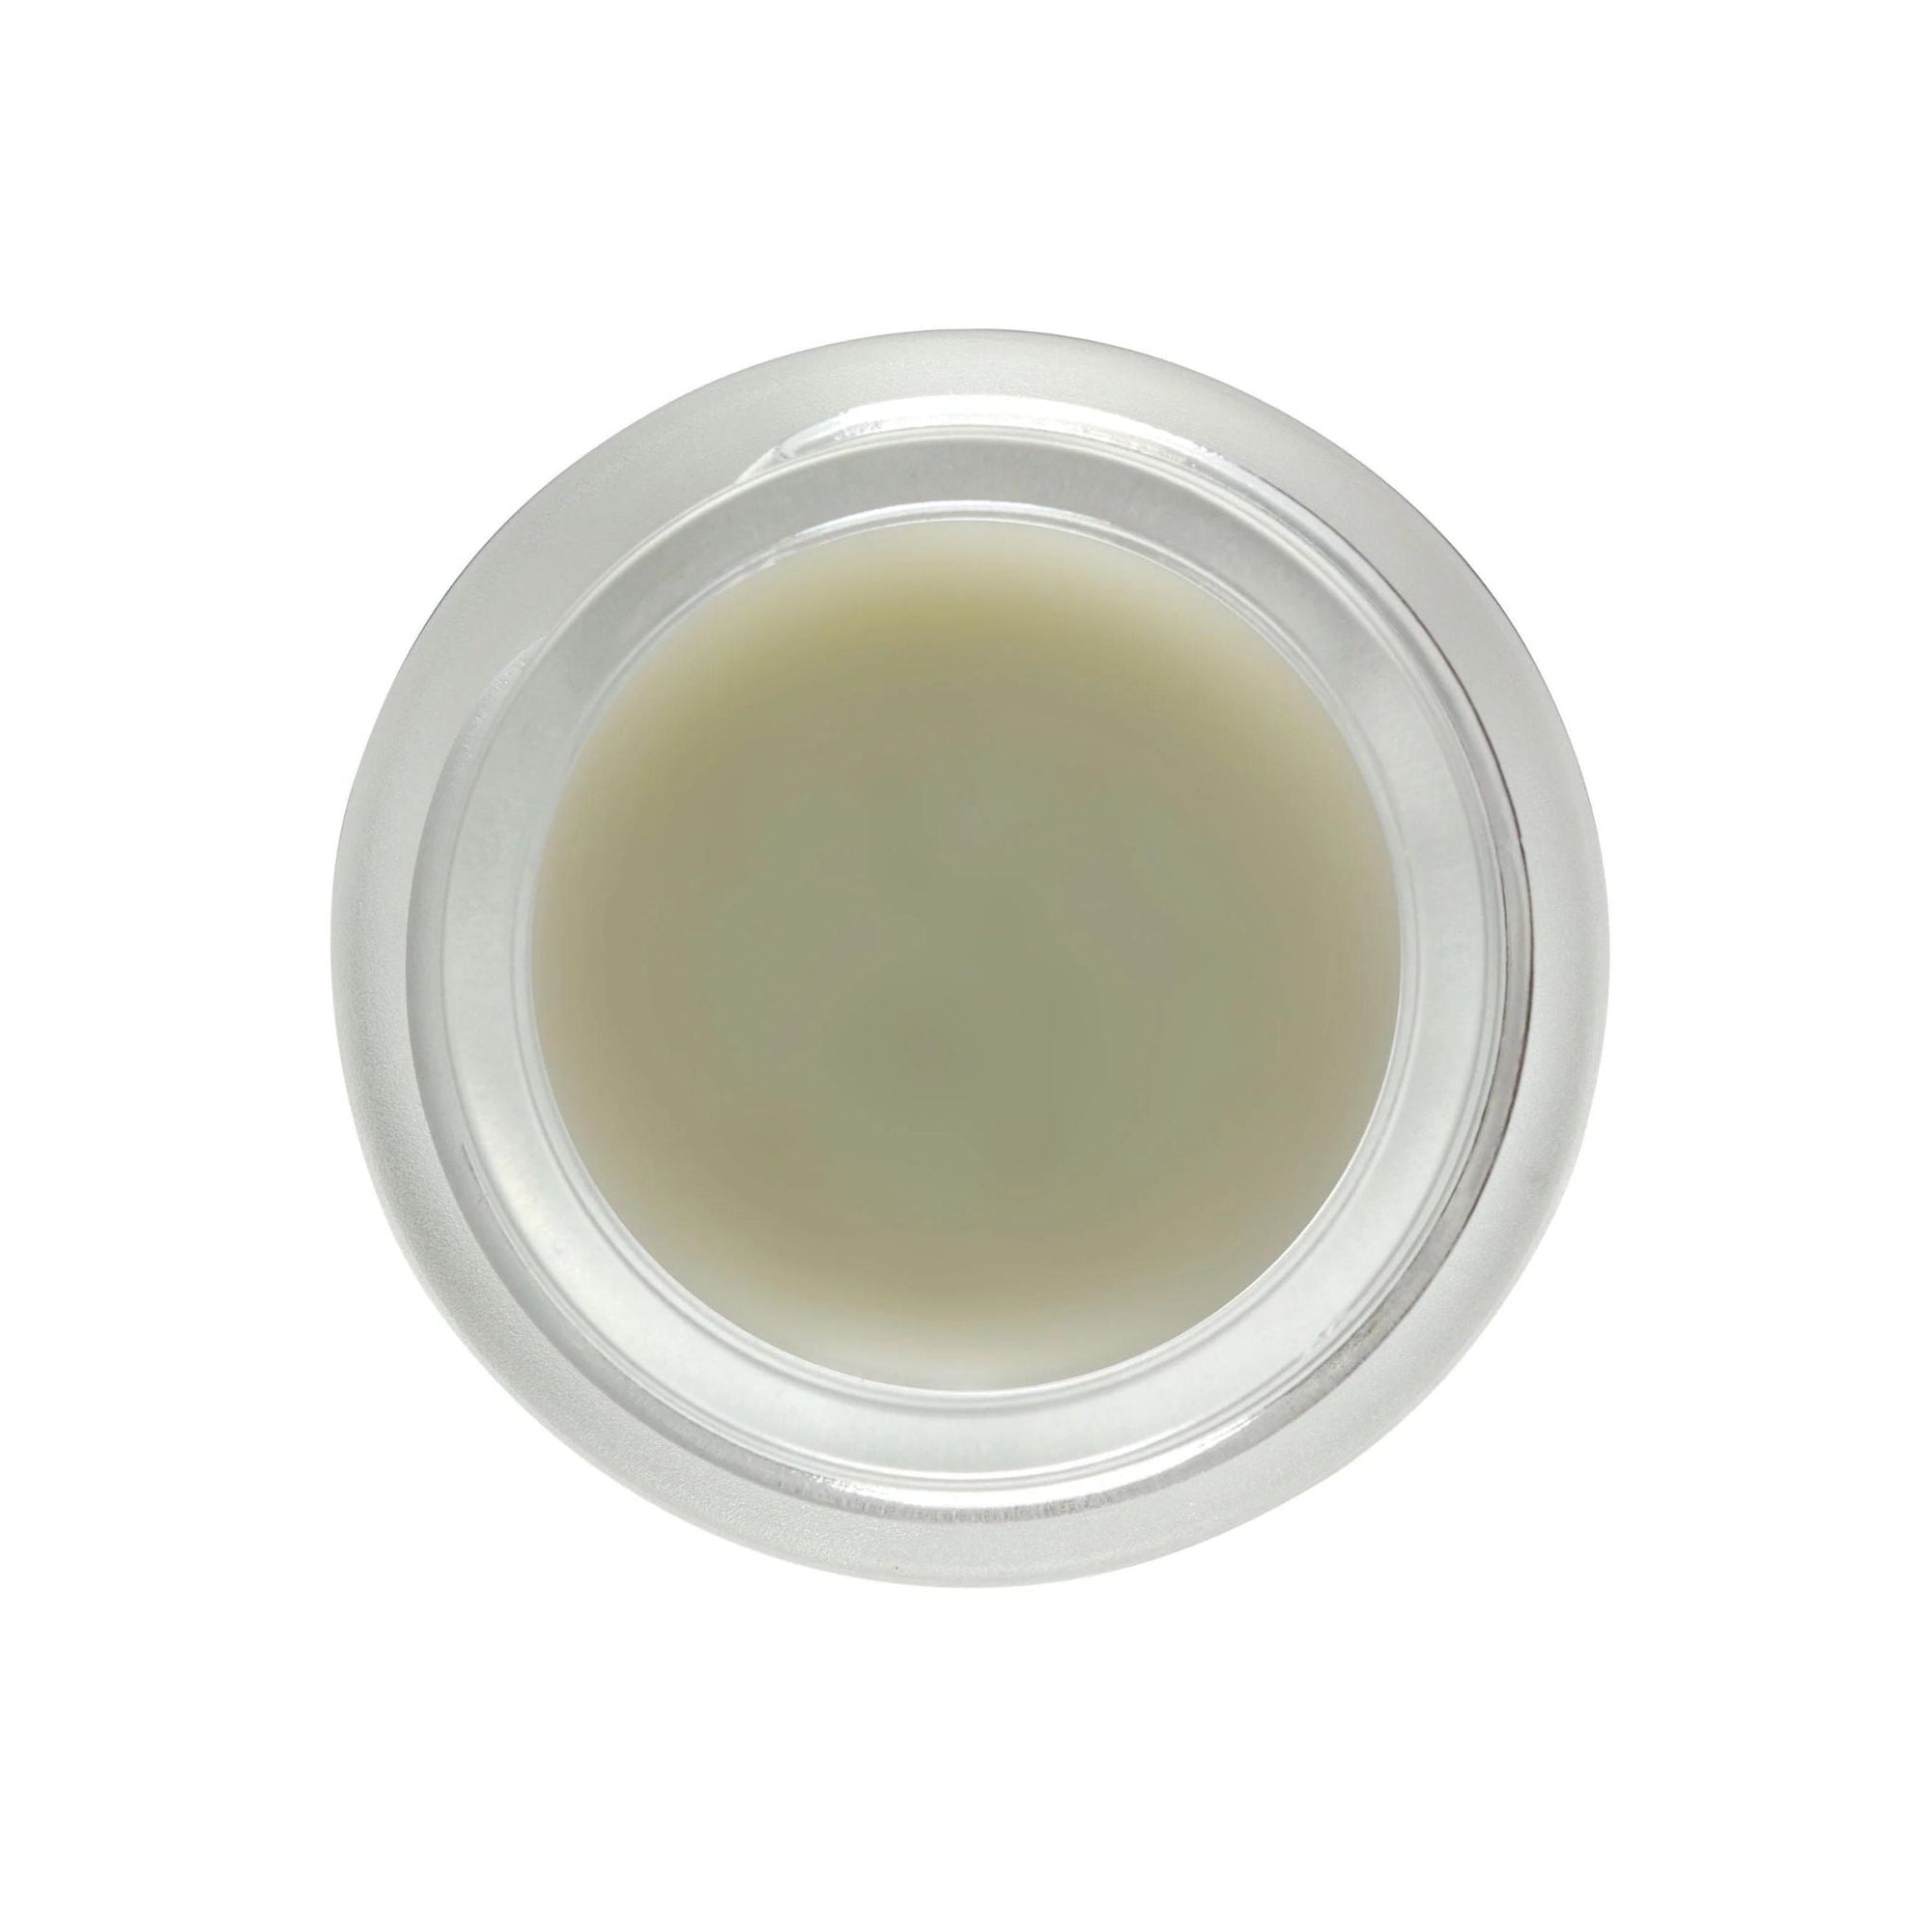 Living Libations - Living Libations Dew Dab Ozonated Beauty Balm - ORESTA clean beauty simplified